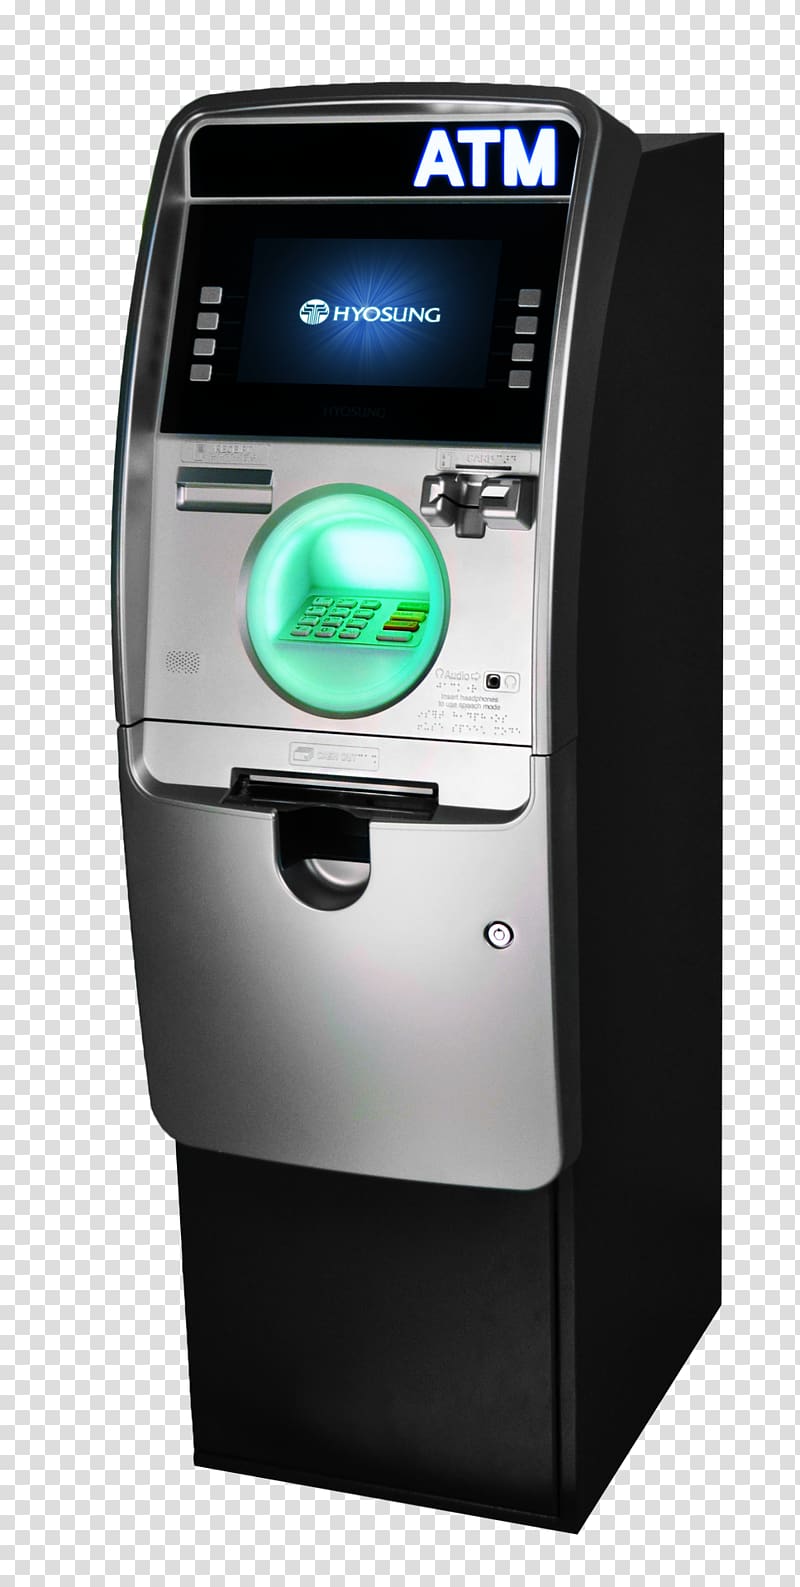 Automated teller machine Halo Nautilus Hyosung ATM Innovation, atm transparent background PNG clipart